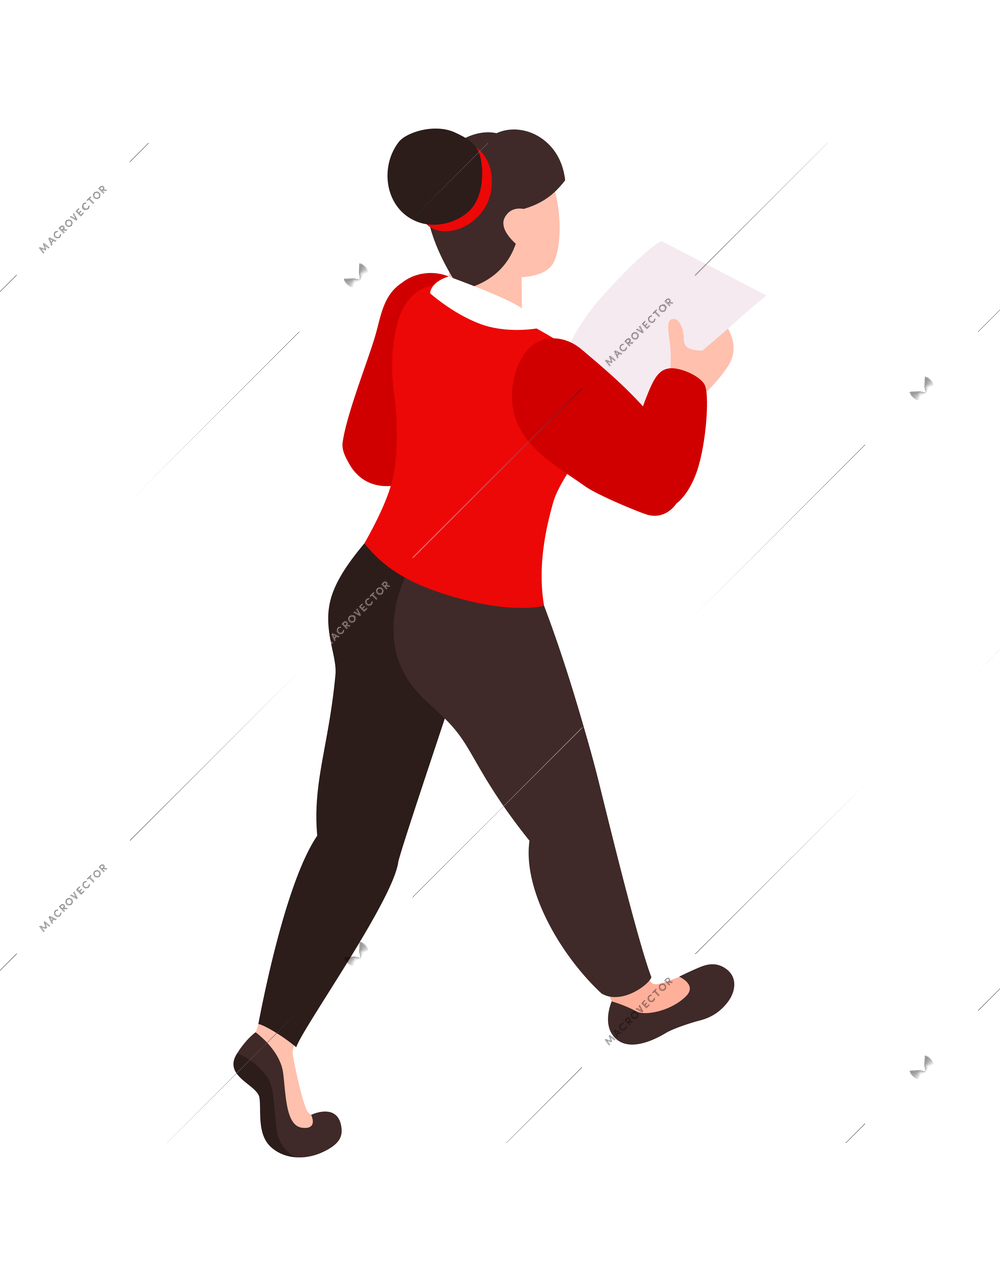 Isometric icon with female character of voter walking with ballot 3d vector illustration